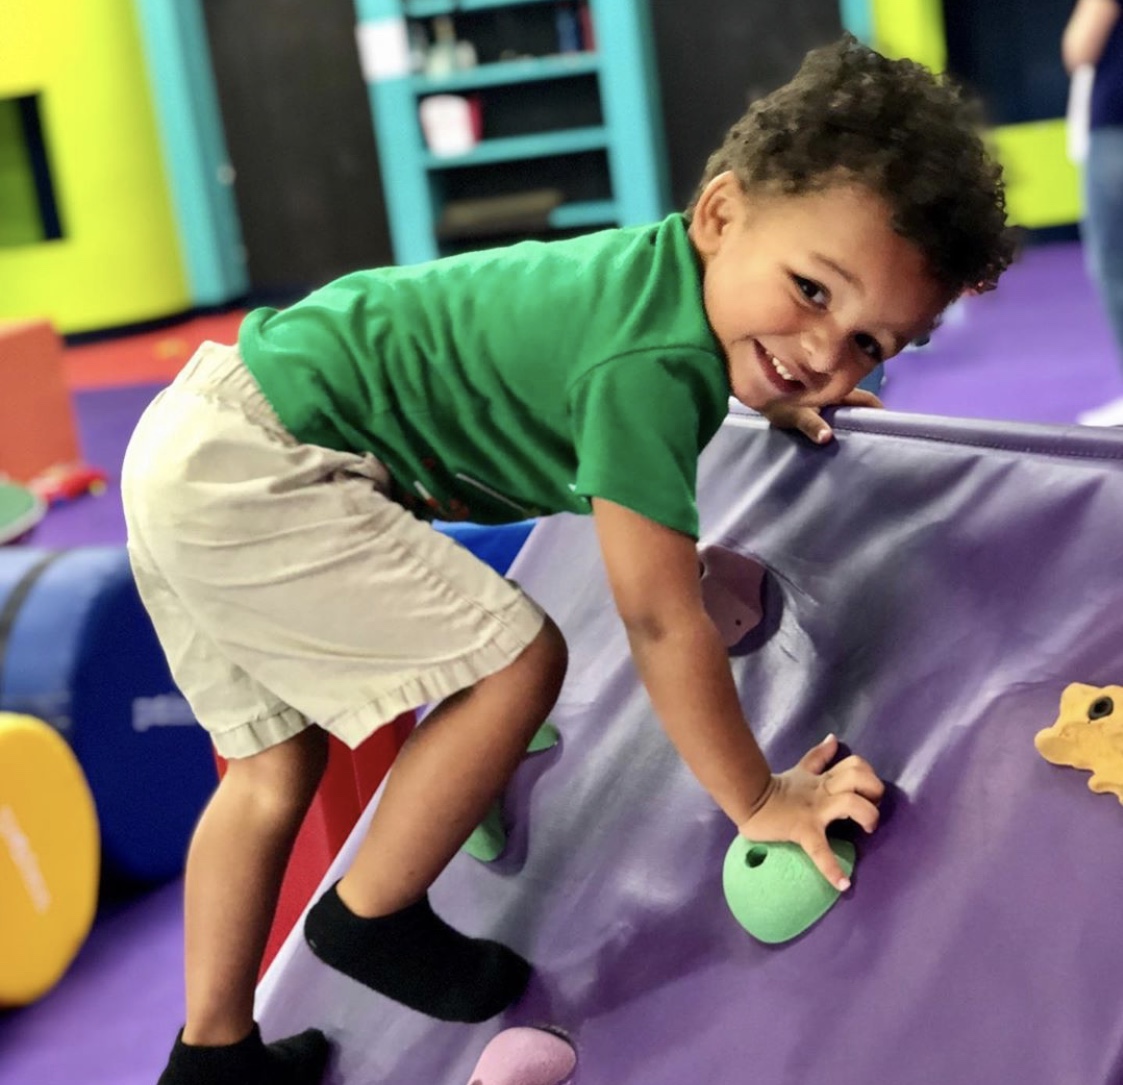 Come play, learn, and explore with us at Romp n' Roll Northwest Charlotte!